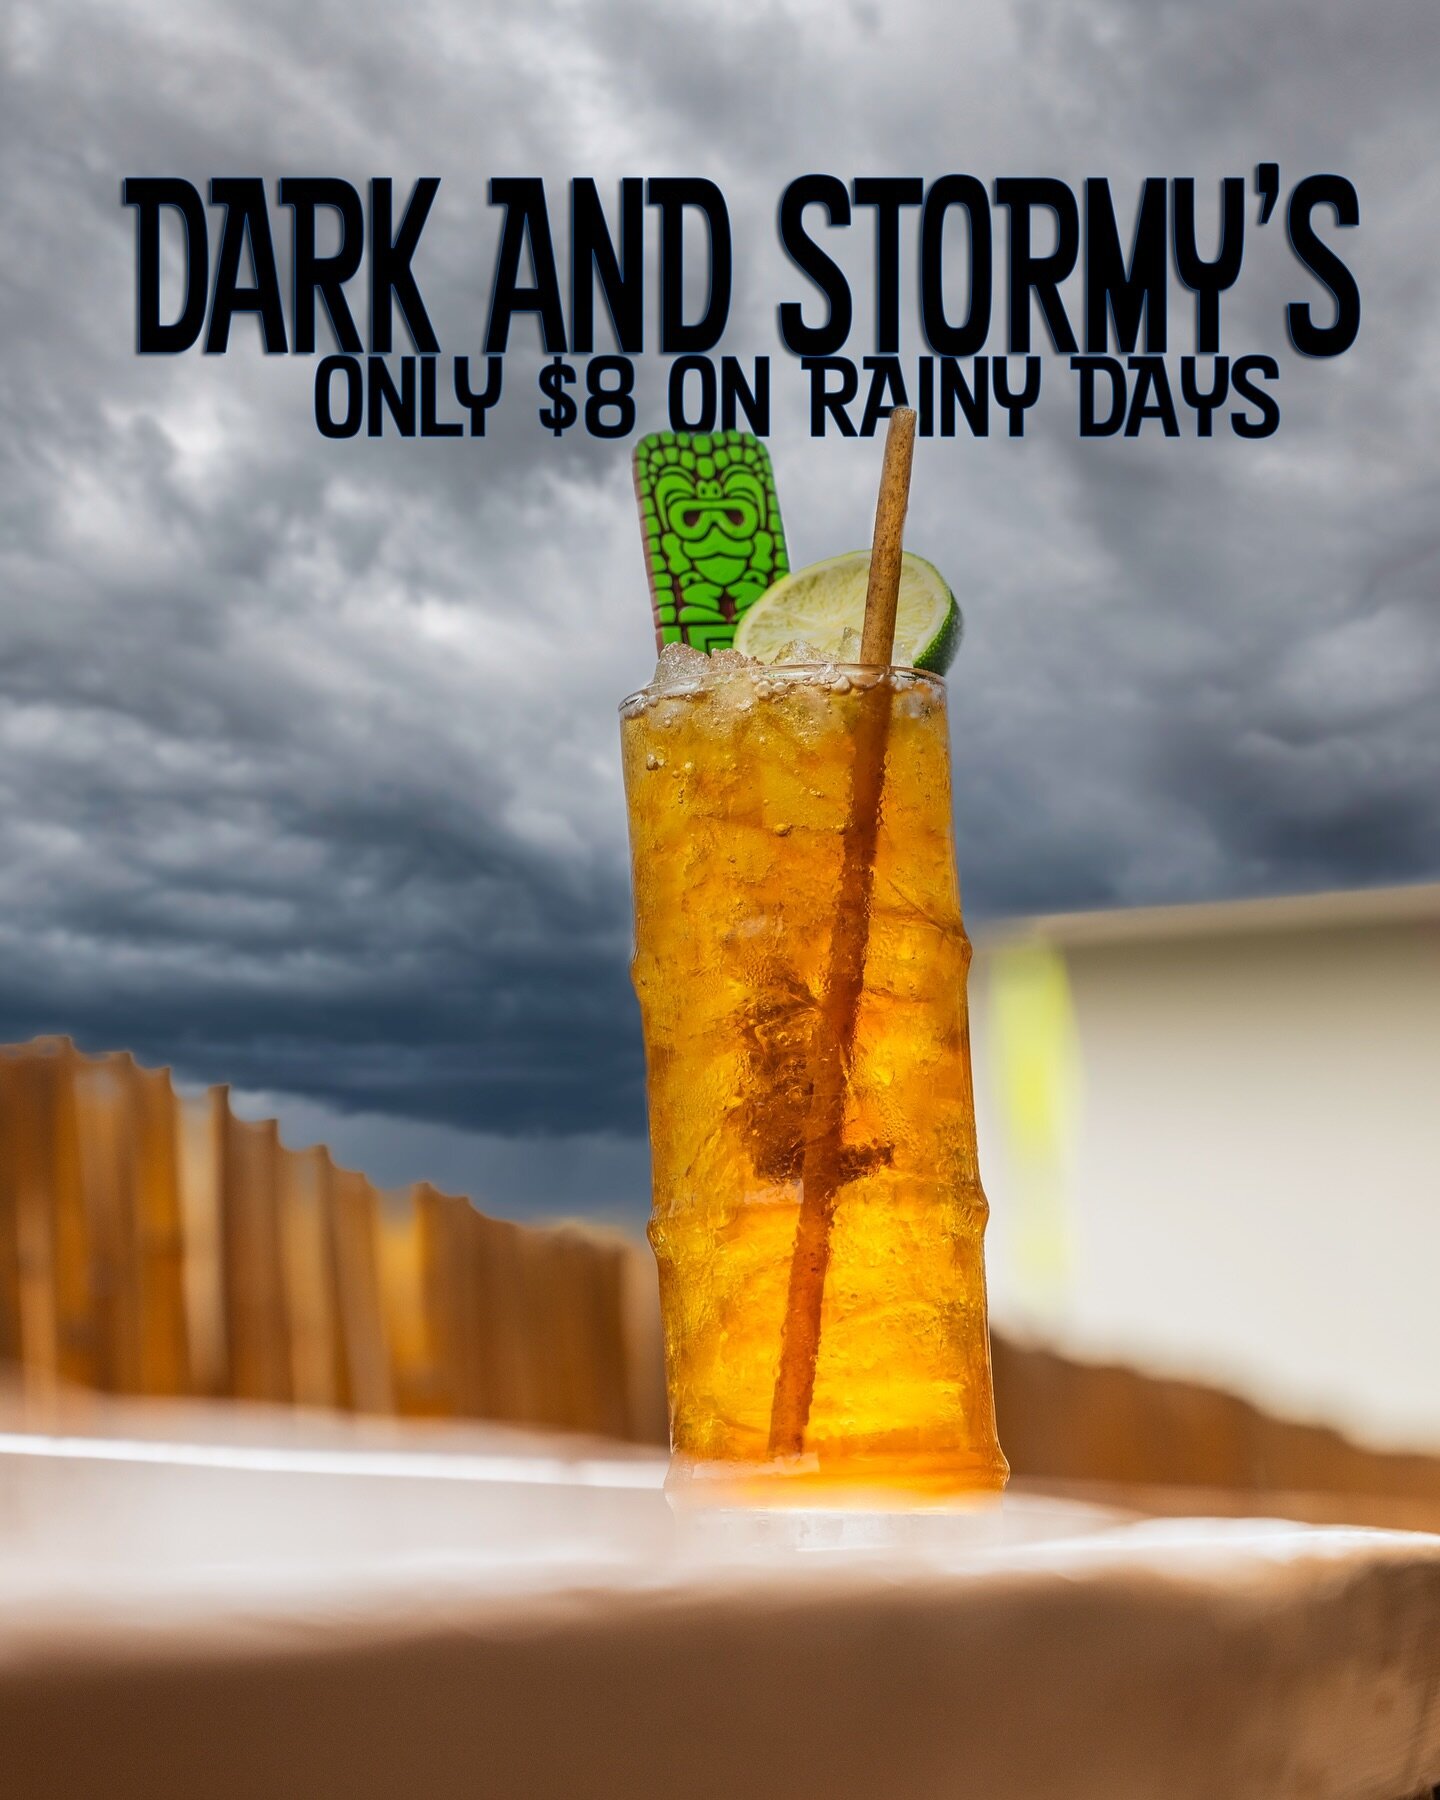 It&rsquo;s raining, we&rsquo;re pouring! That&rsquo;s right on Rainy days Dark And Stormys are only $8 so come ride out the storm with us here inside where it&rsquo;s nice and warm 🌴 #kapu #kapubar #petaluma #darkandstormy